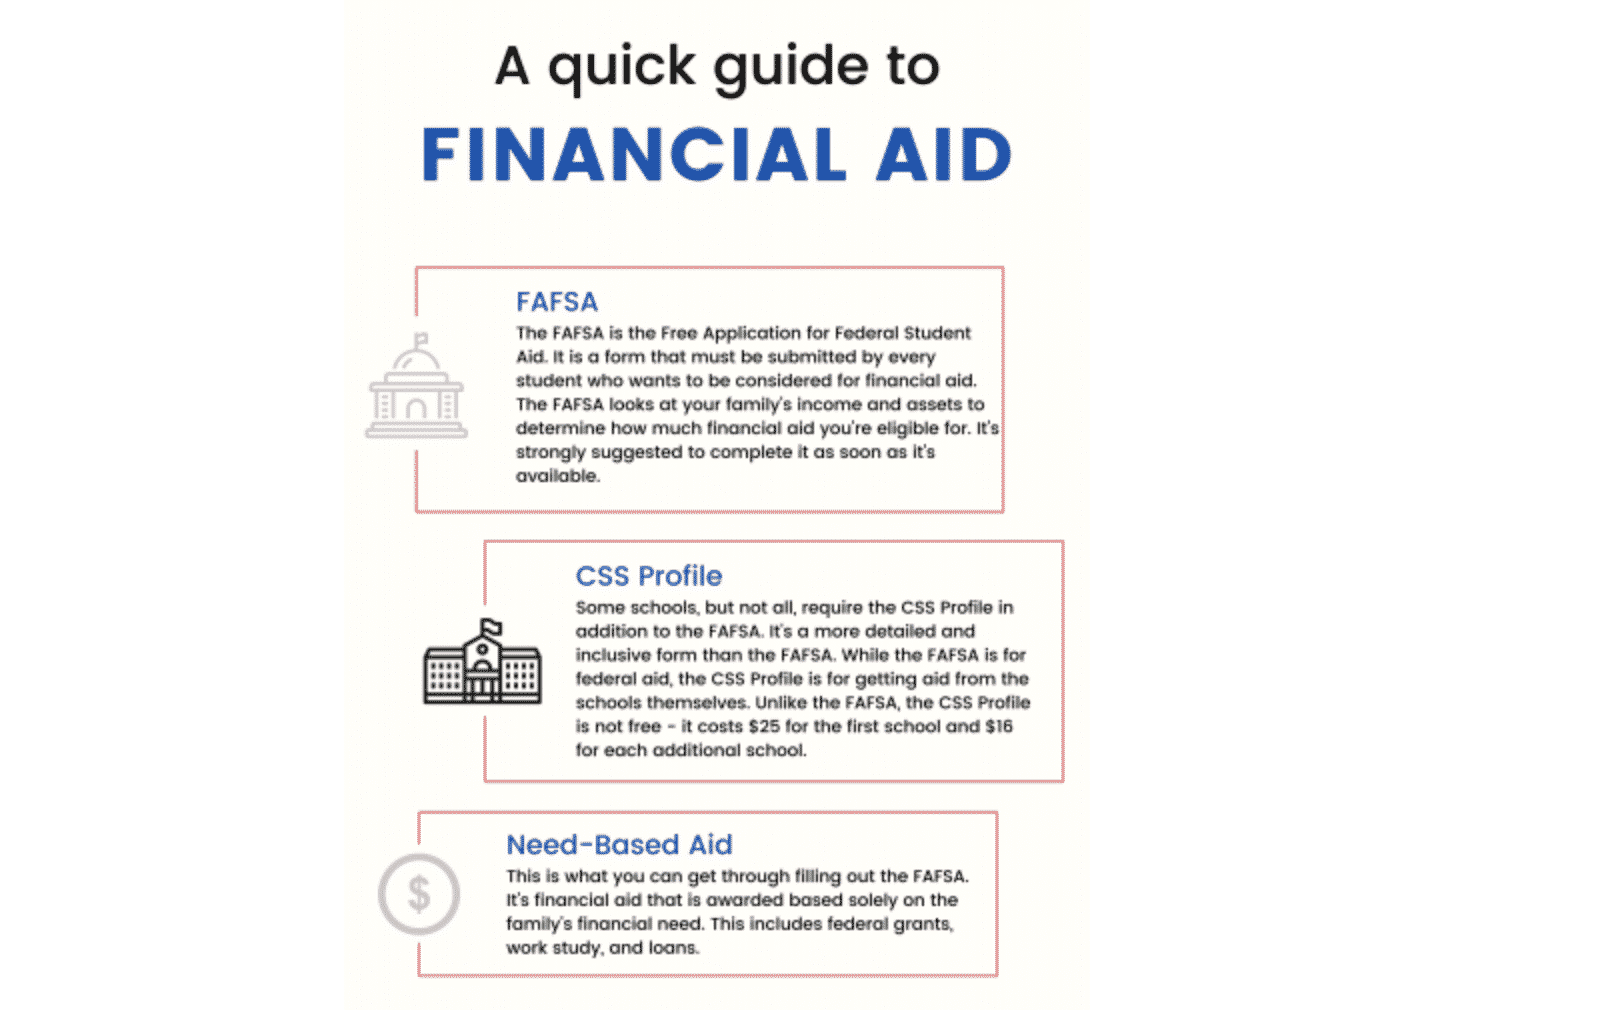 A quick guide to financial aid graphic